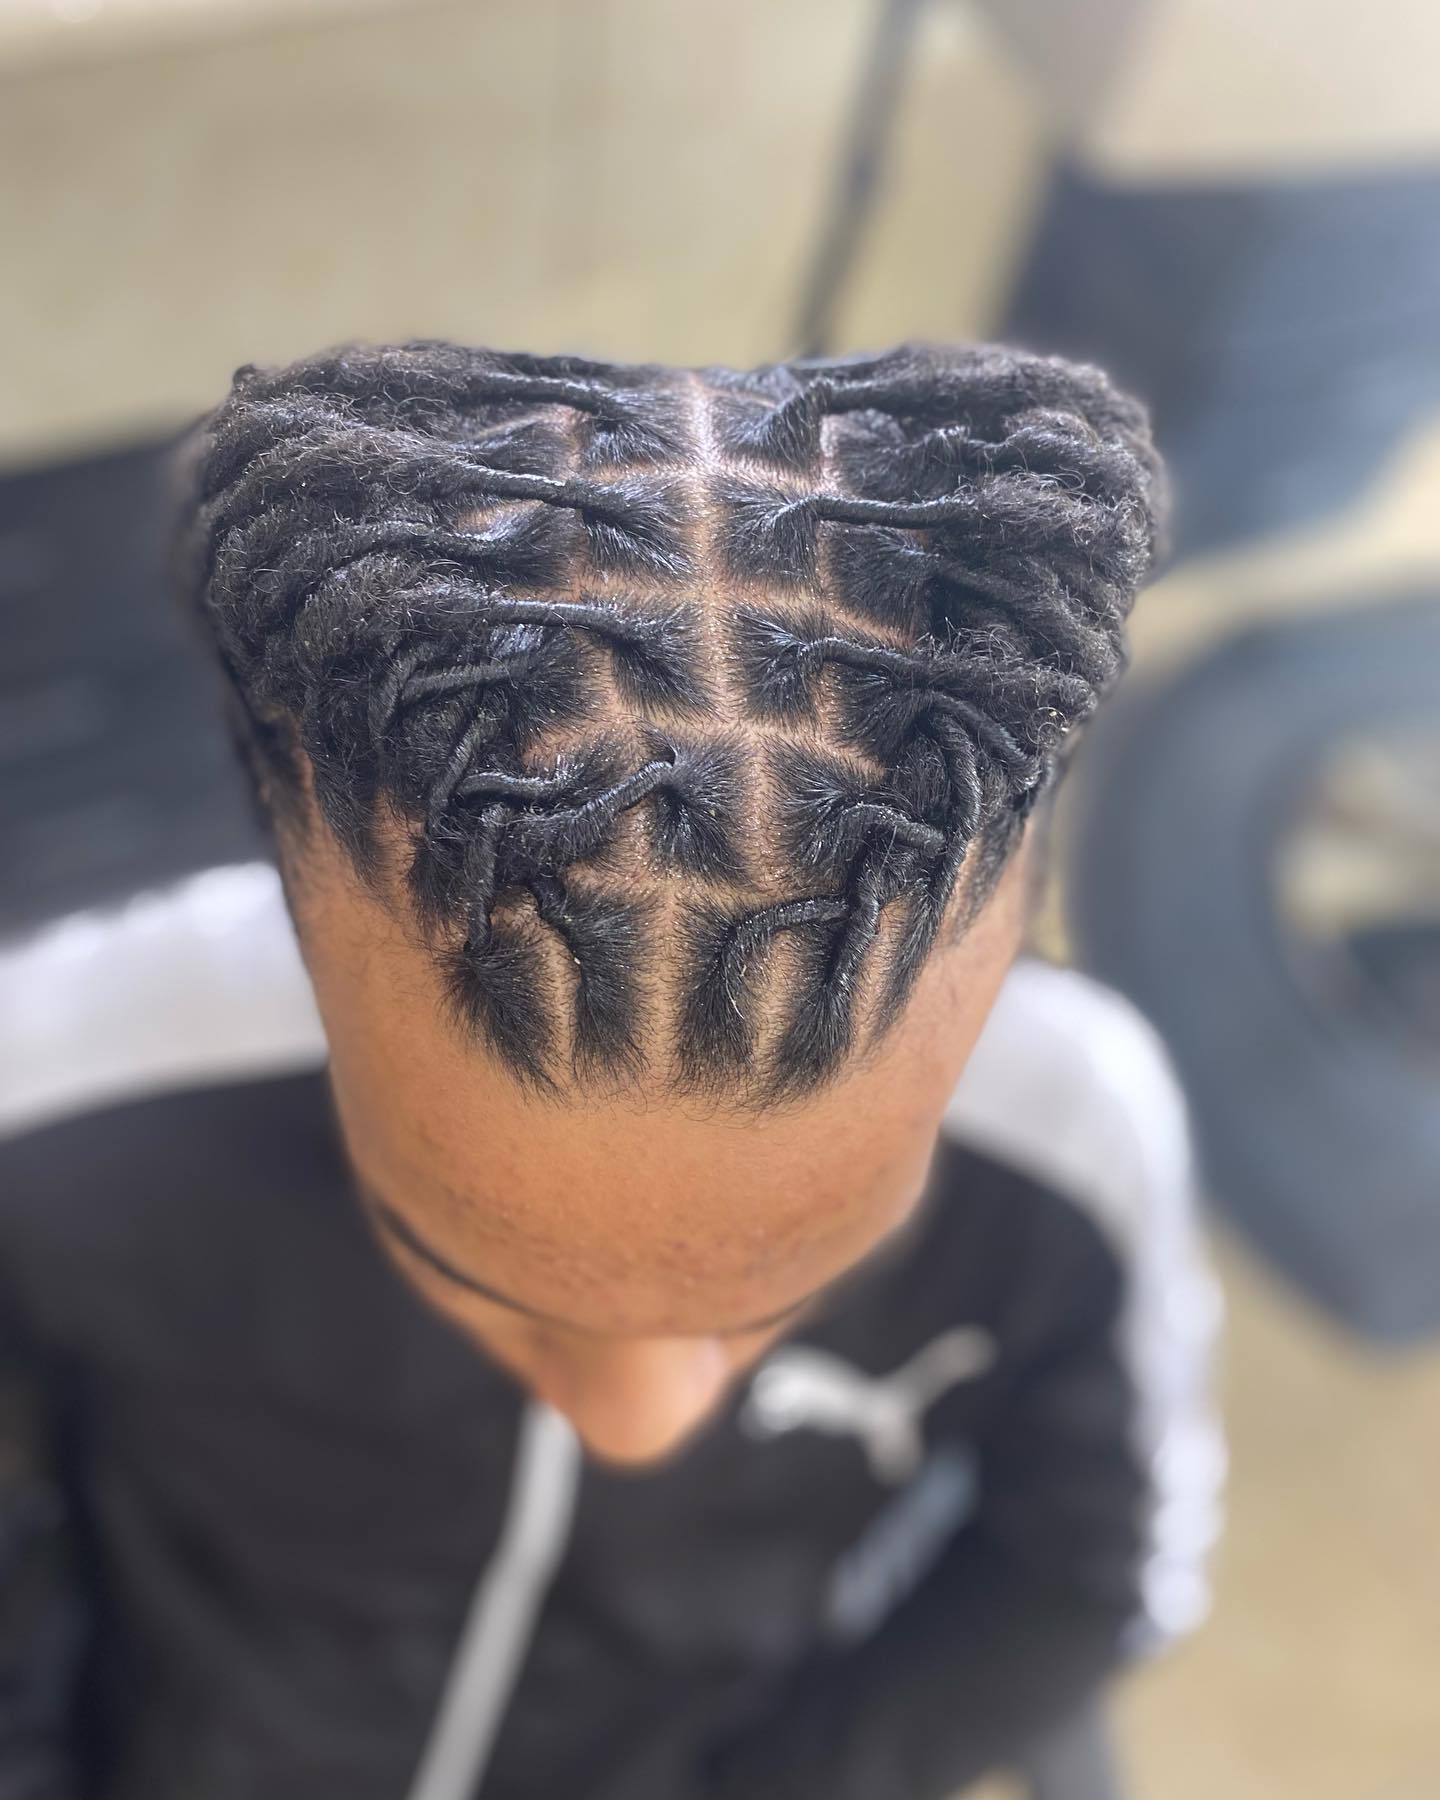 Image of Two Barrel Twist Dreads inspired by Dreadlocks Hairstyles for Men